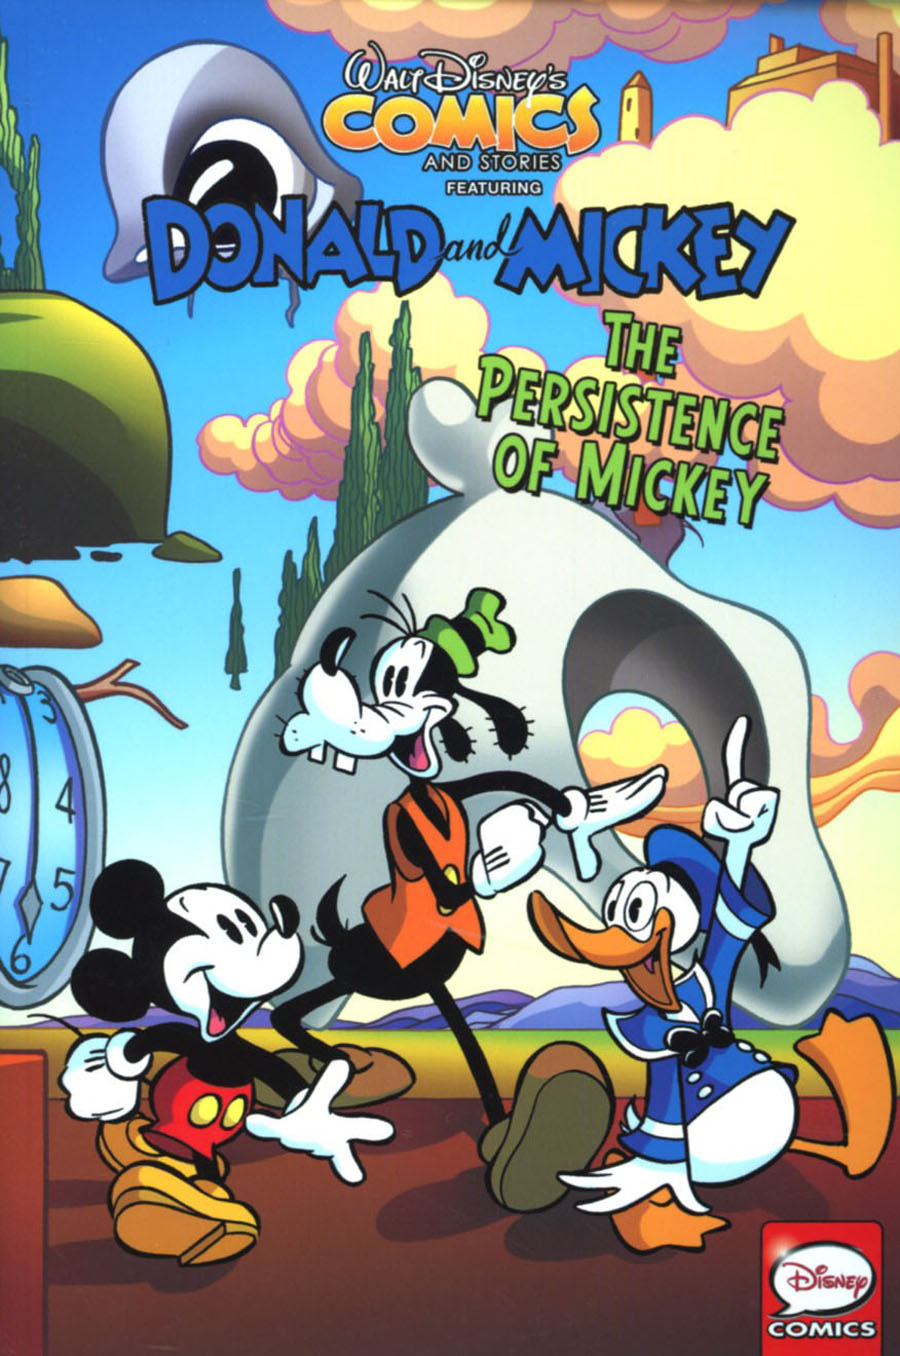 Walt Disneys Comics And Stories Featuring Donald And Mickey Persistence Of Mickey TP